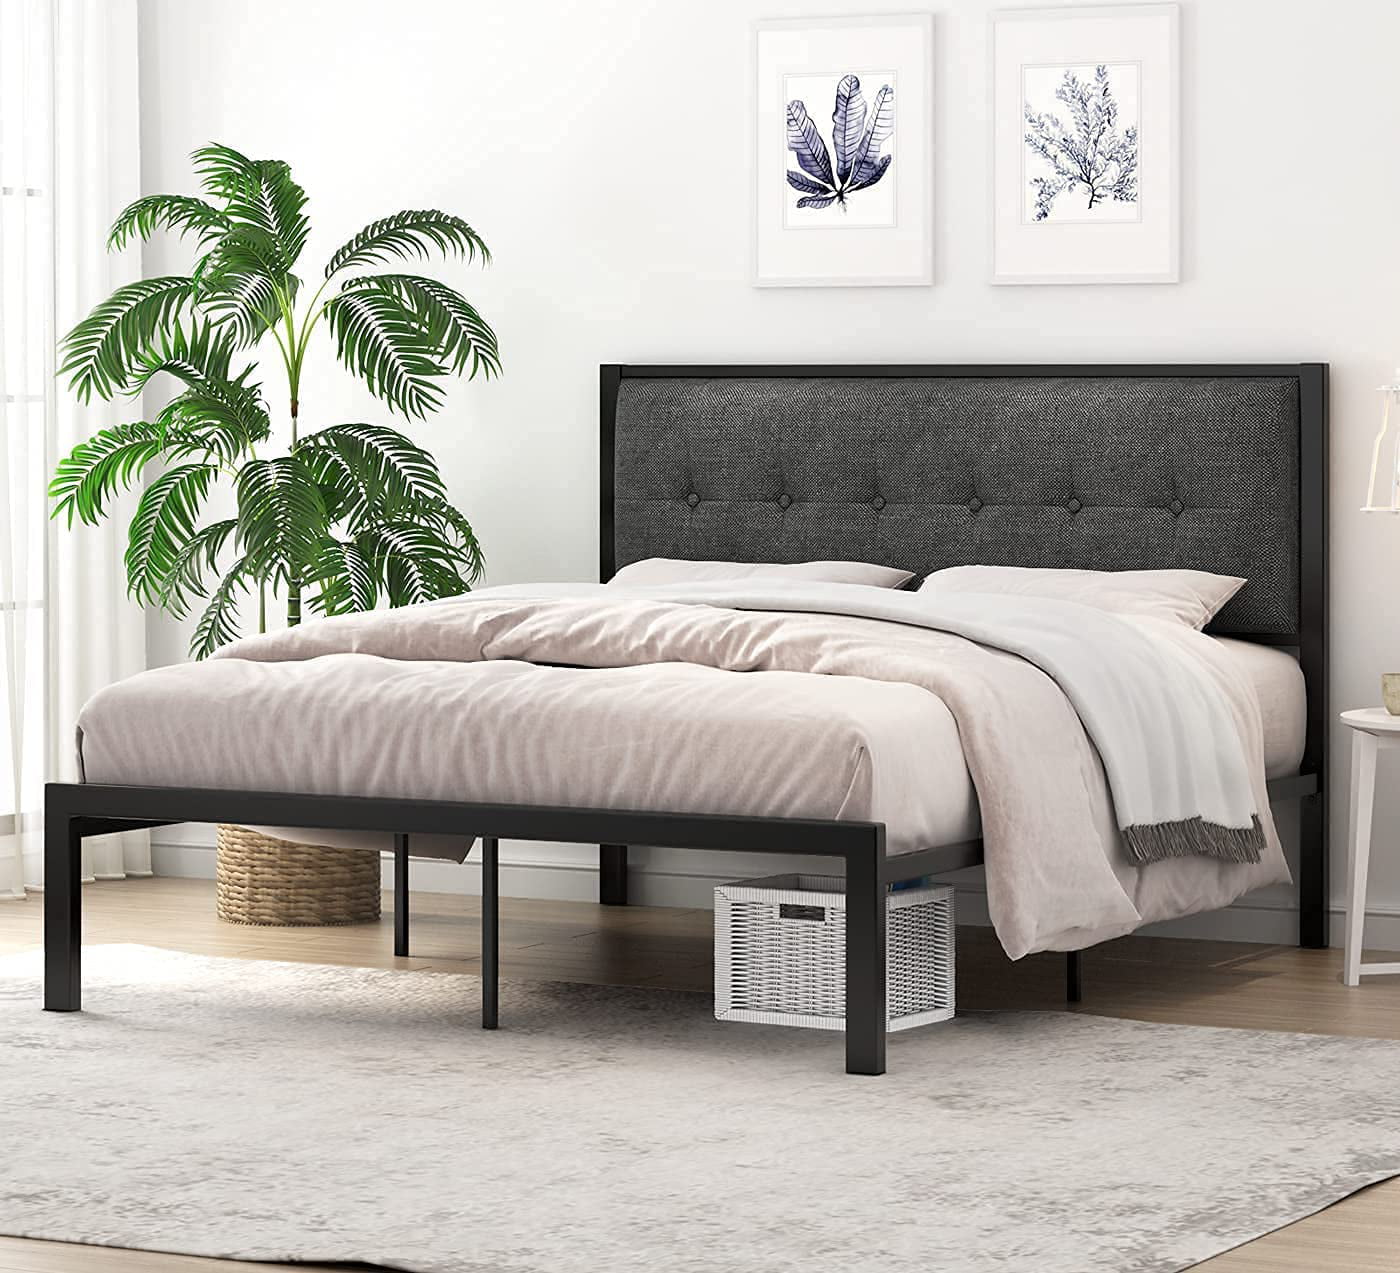 Buy SHA CERLIN Queen Metal Platform Bed with Upholstered Button Tufted